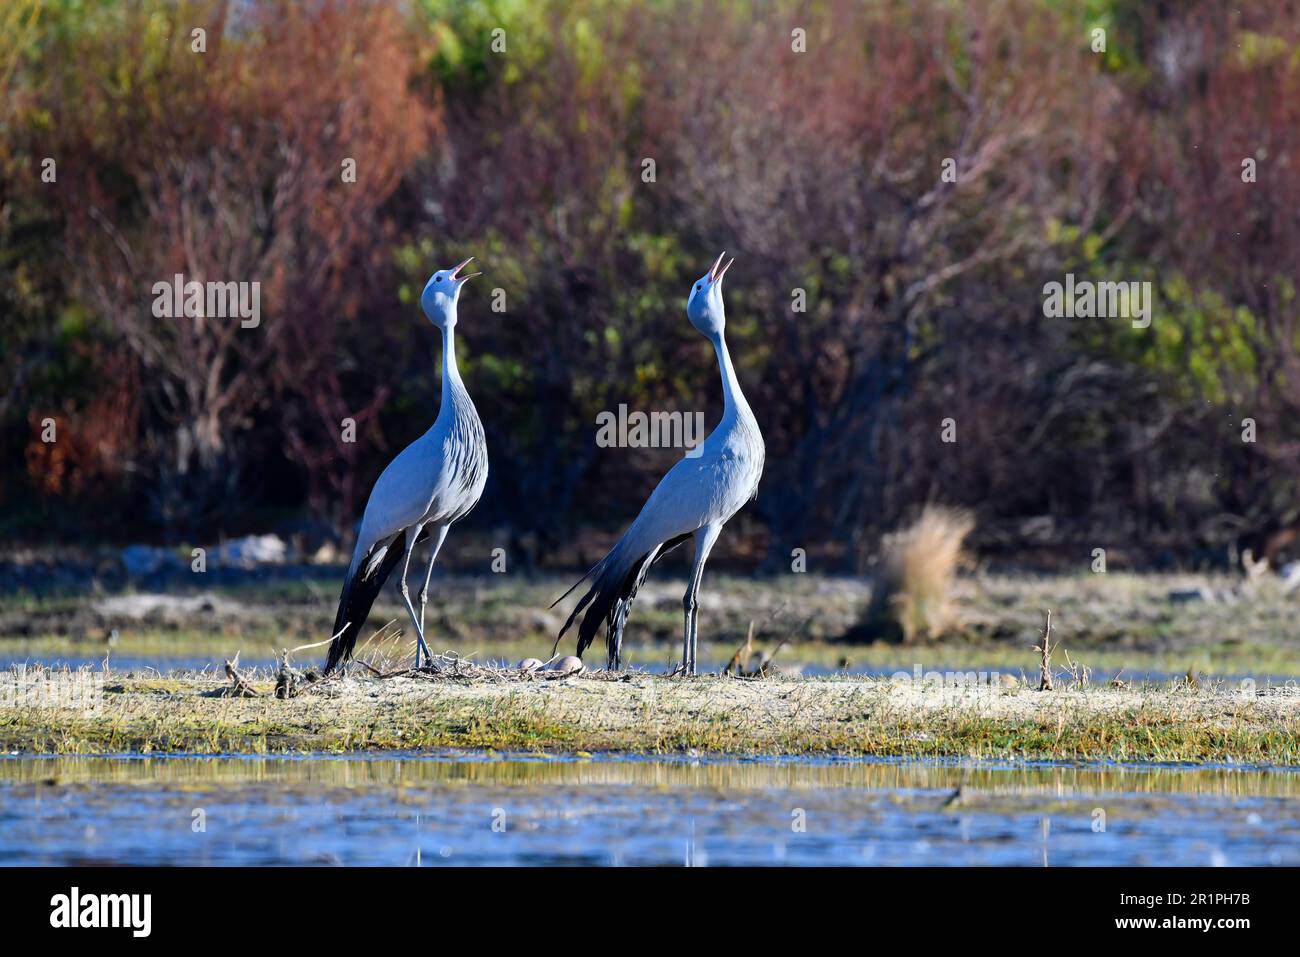 Blue Cranes [Anthropoides paradiseus] at their nesting site, Bot River wetland, Overberg, South Africa. Stock Photo